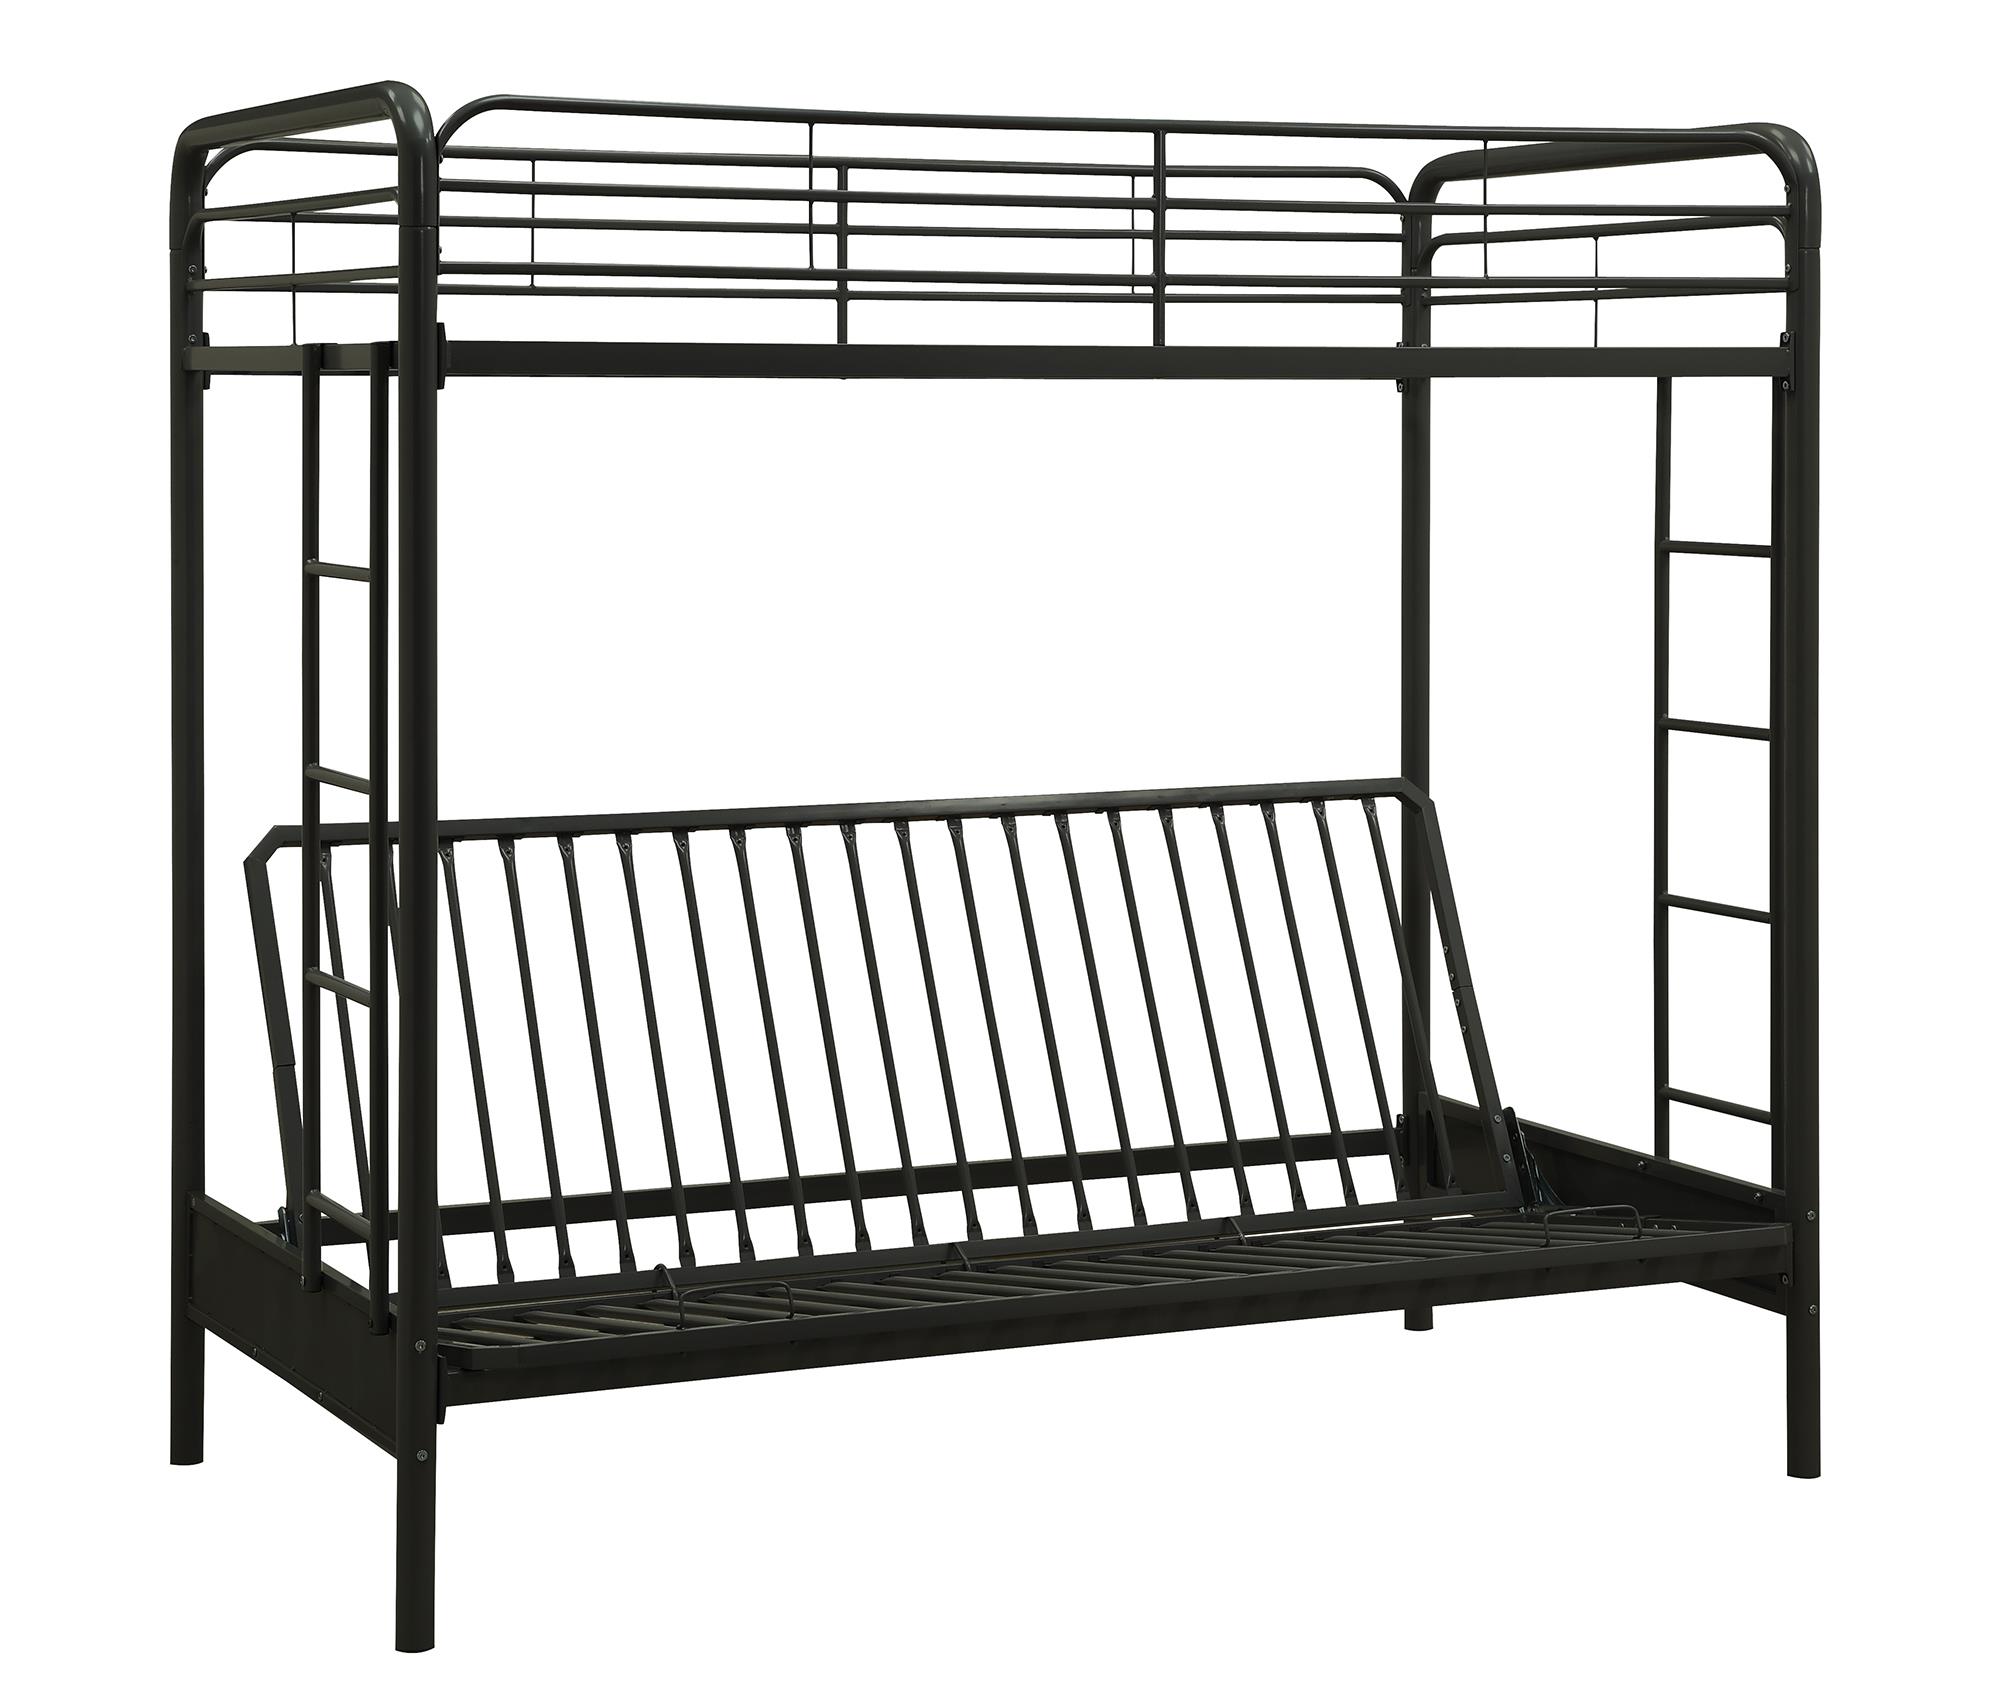 DHP Sammie Twin over Futon Metal Bunk Bed, Black - image 3 of 14